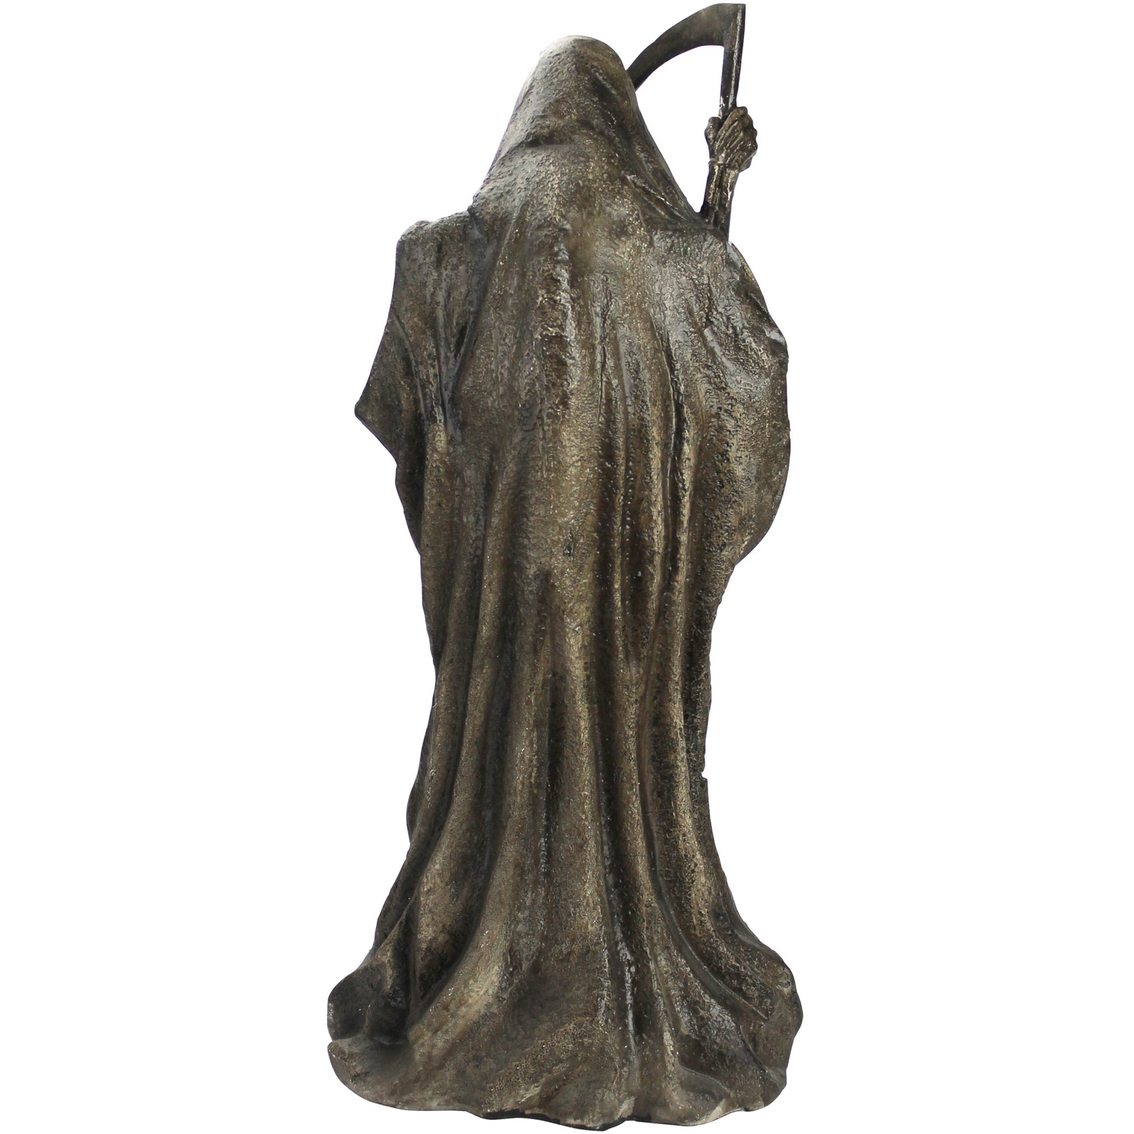 Design Toscano Rest in Pieces Grim Reaper Tombstone Statue 25 in. H - Image 3 of 4